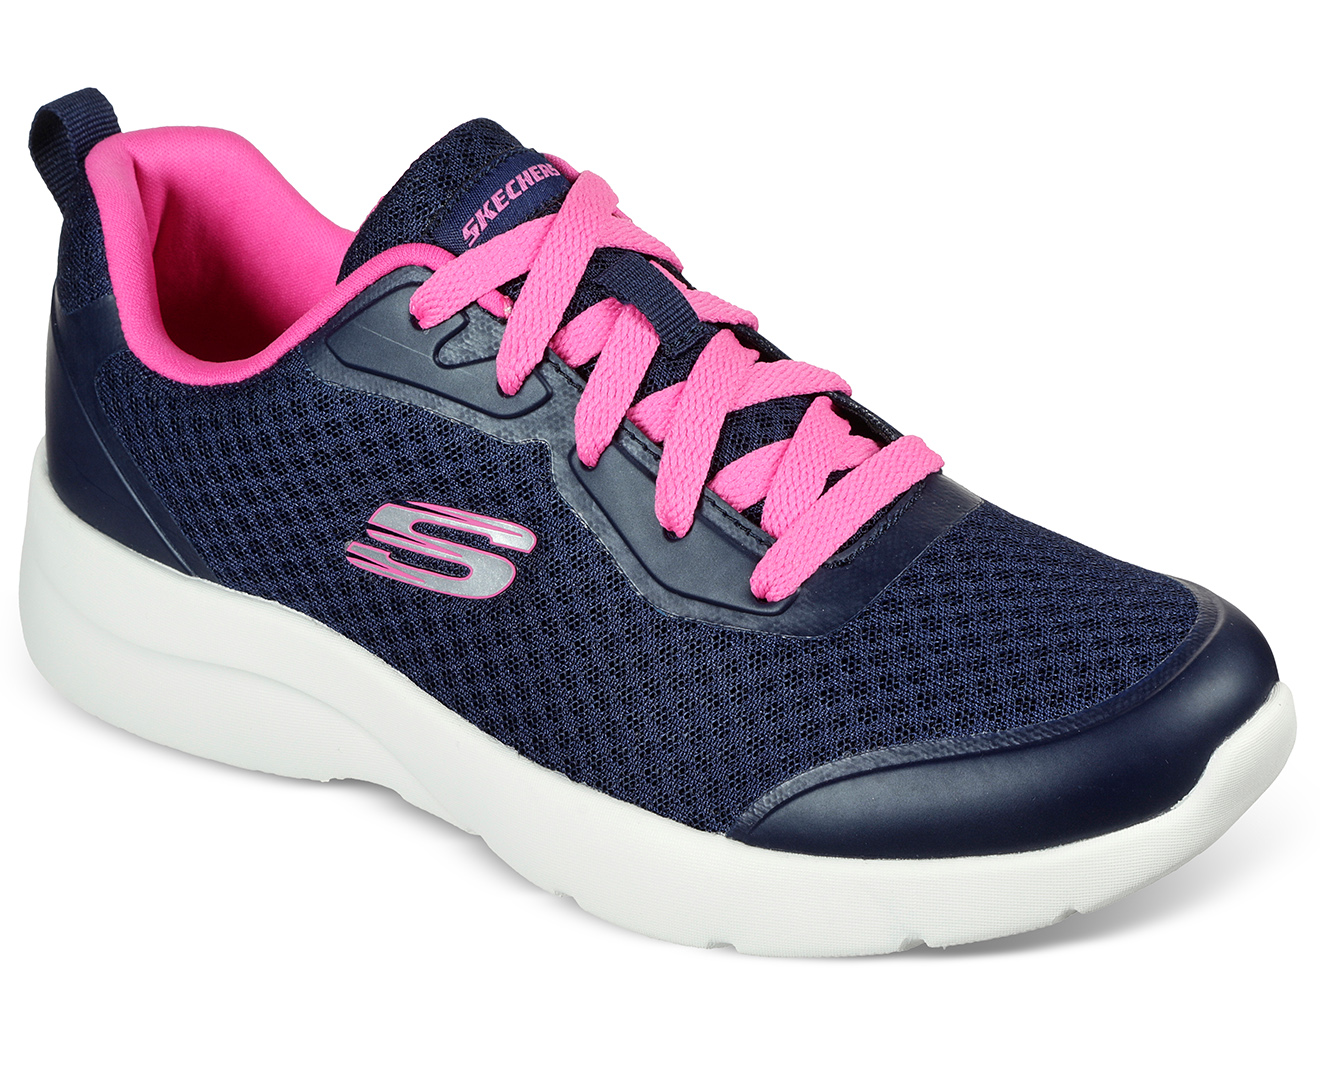 Skechers Women's Dynamight Special Memory Trainers - Navy/Hot Pink | Catch.com.au